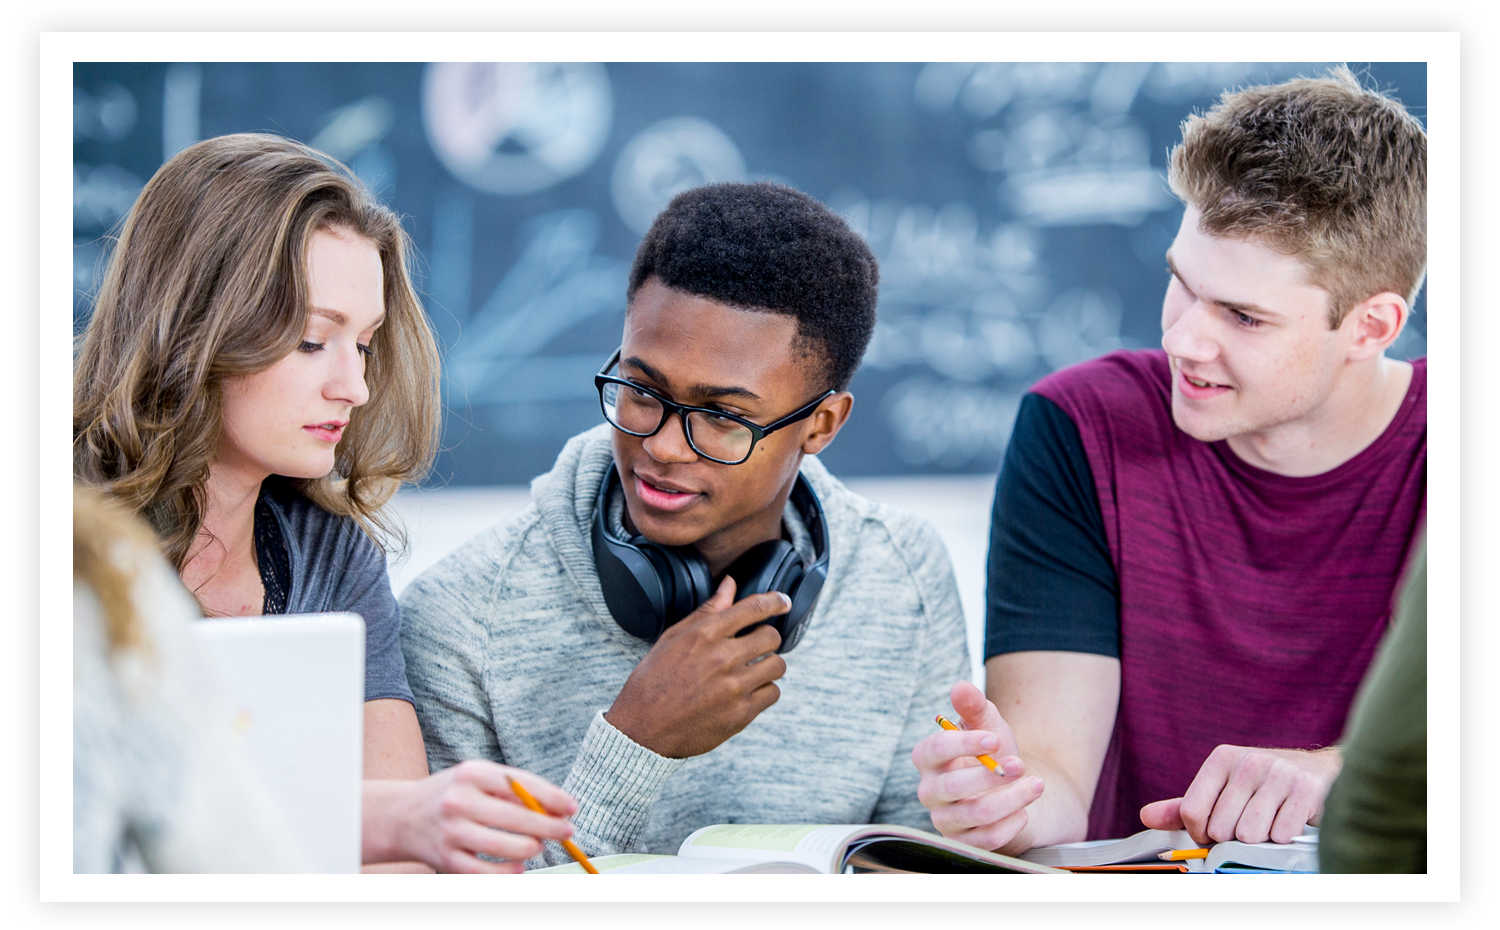 stock image of students working together